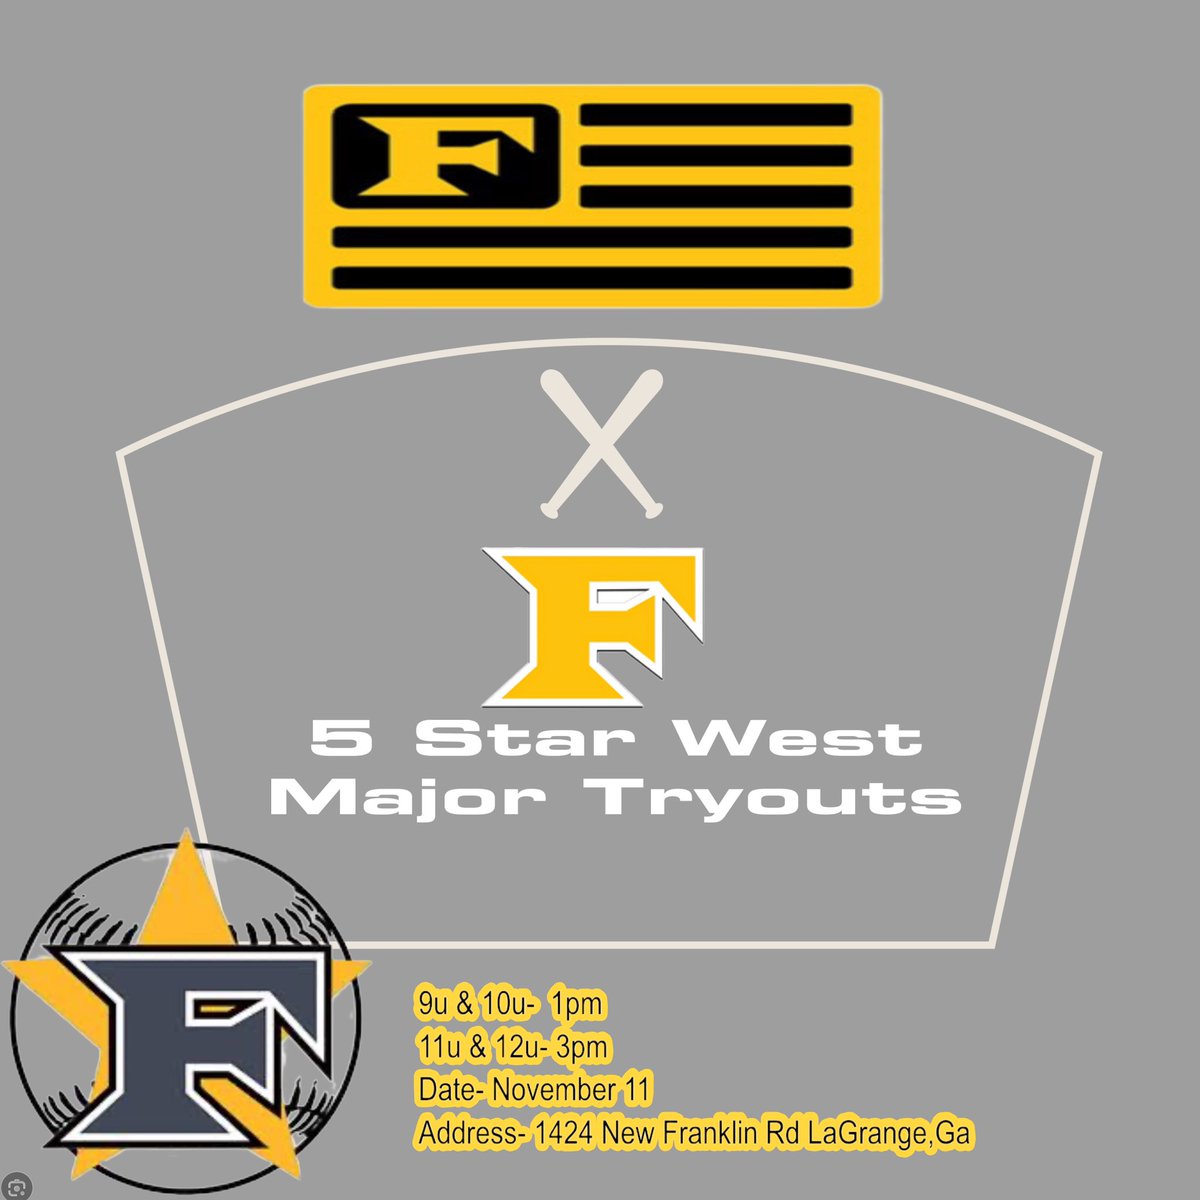 5 Star West Youth Major Tryouts!